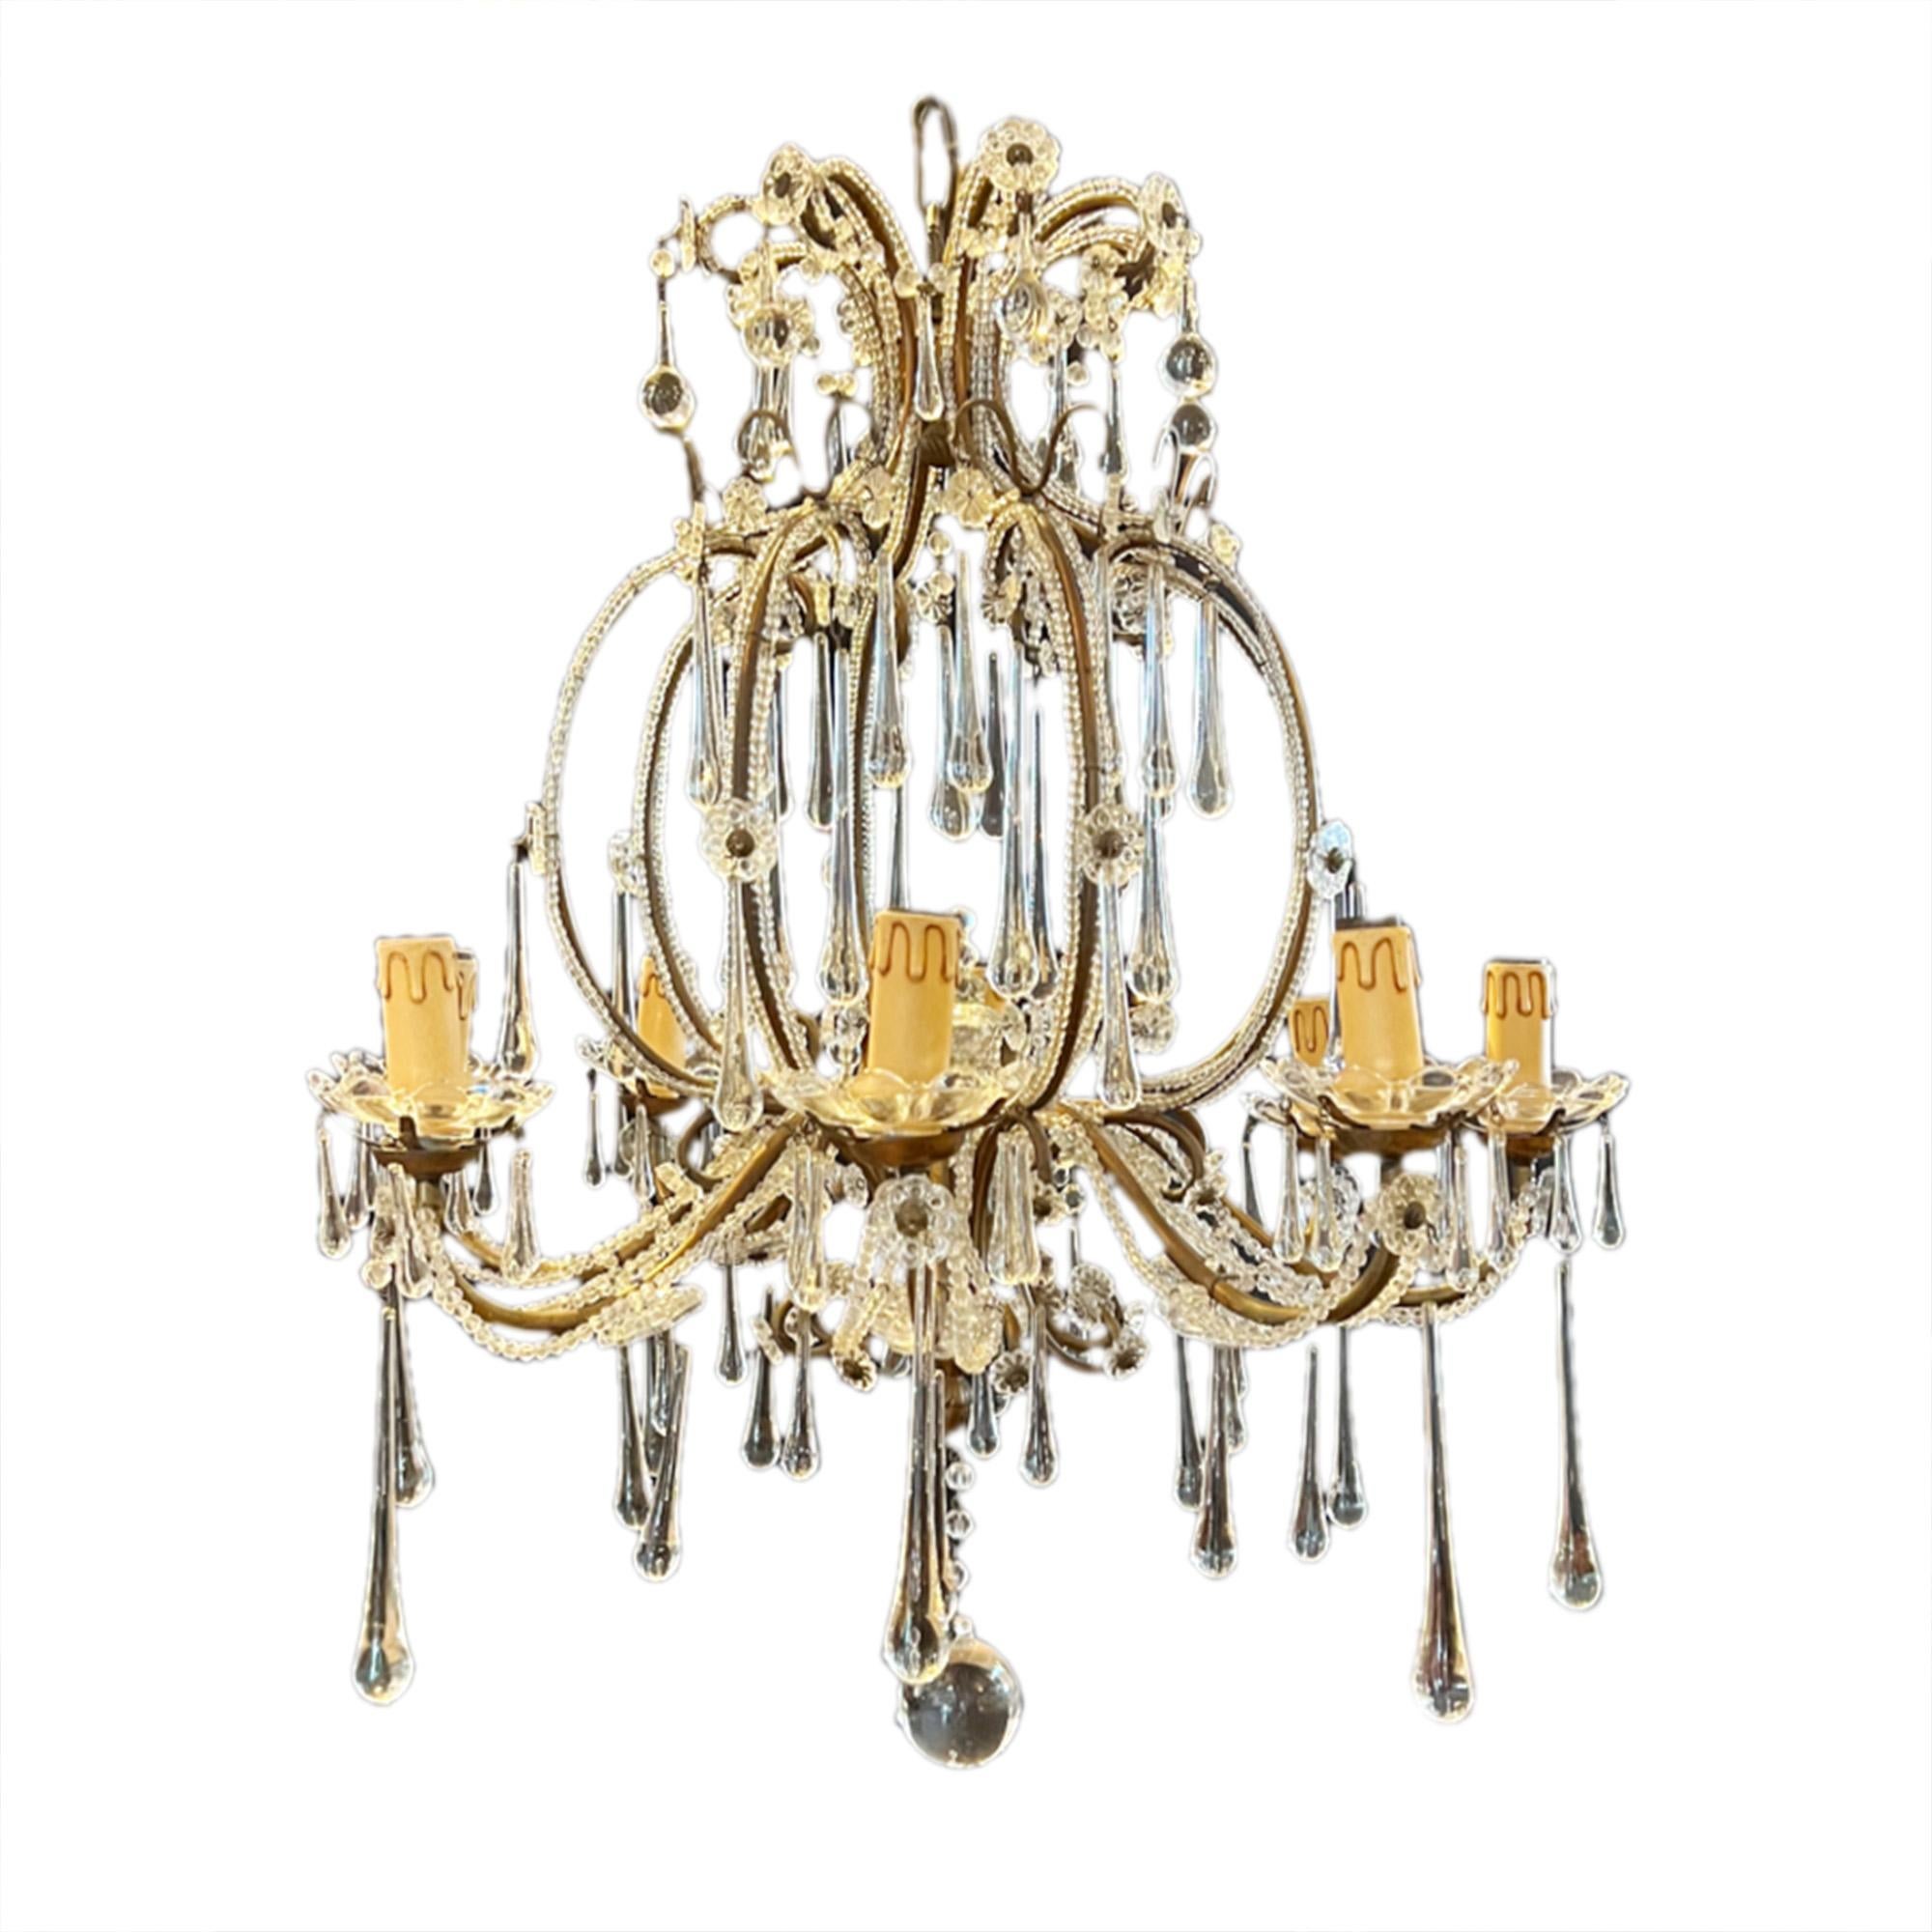 This pretty, medium sized chandelier was made in Italy in the 1950s.

Very decorative - featuring tear shaped drops. These are smaller at the top and increase in size to much larger ones at the bottom. Glass flowers and the ball at the base finish